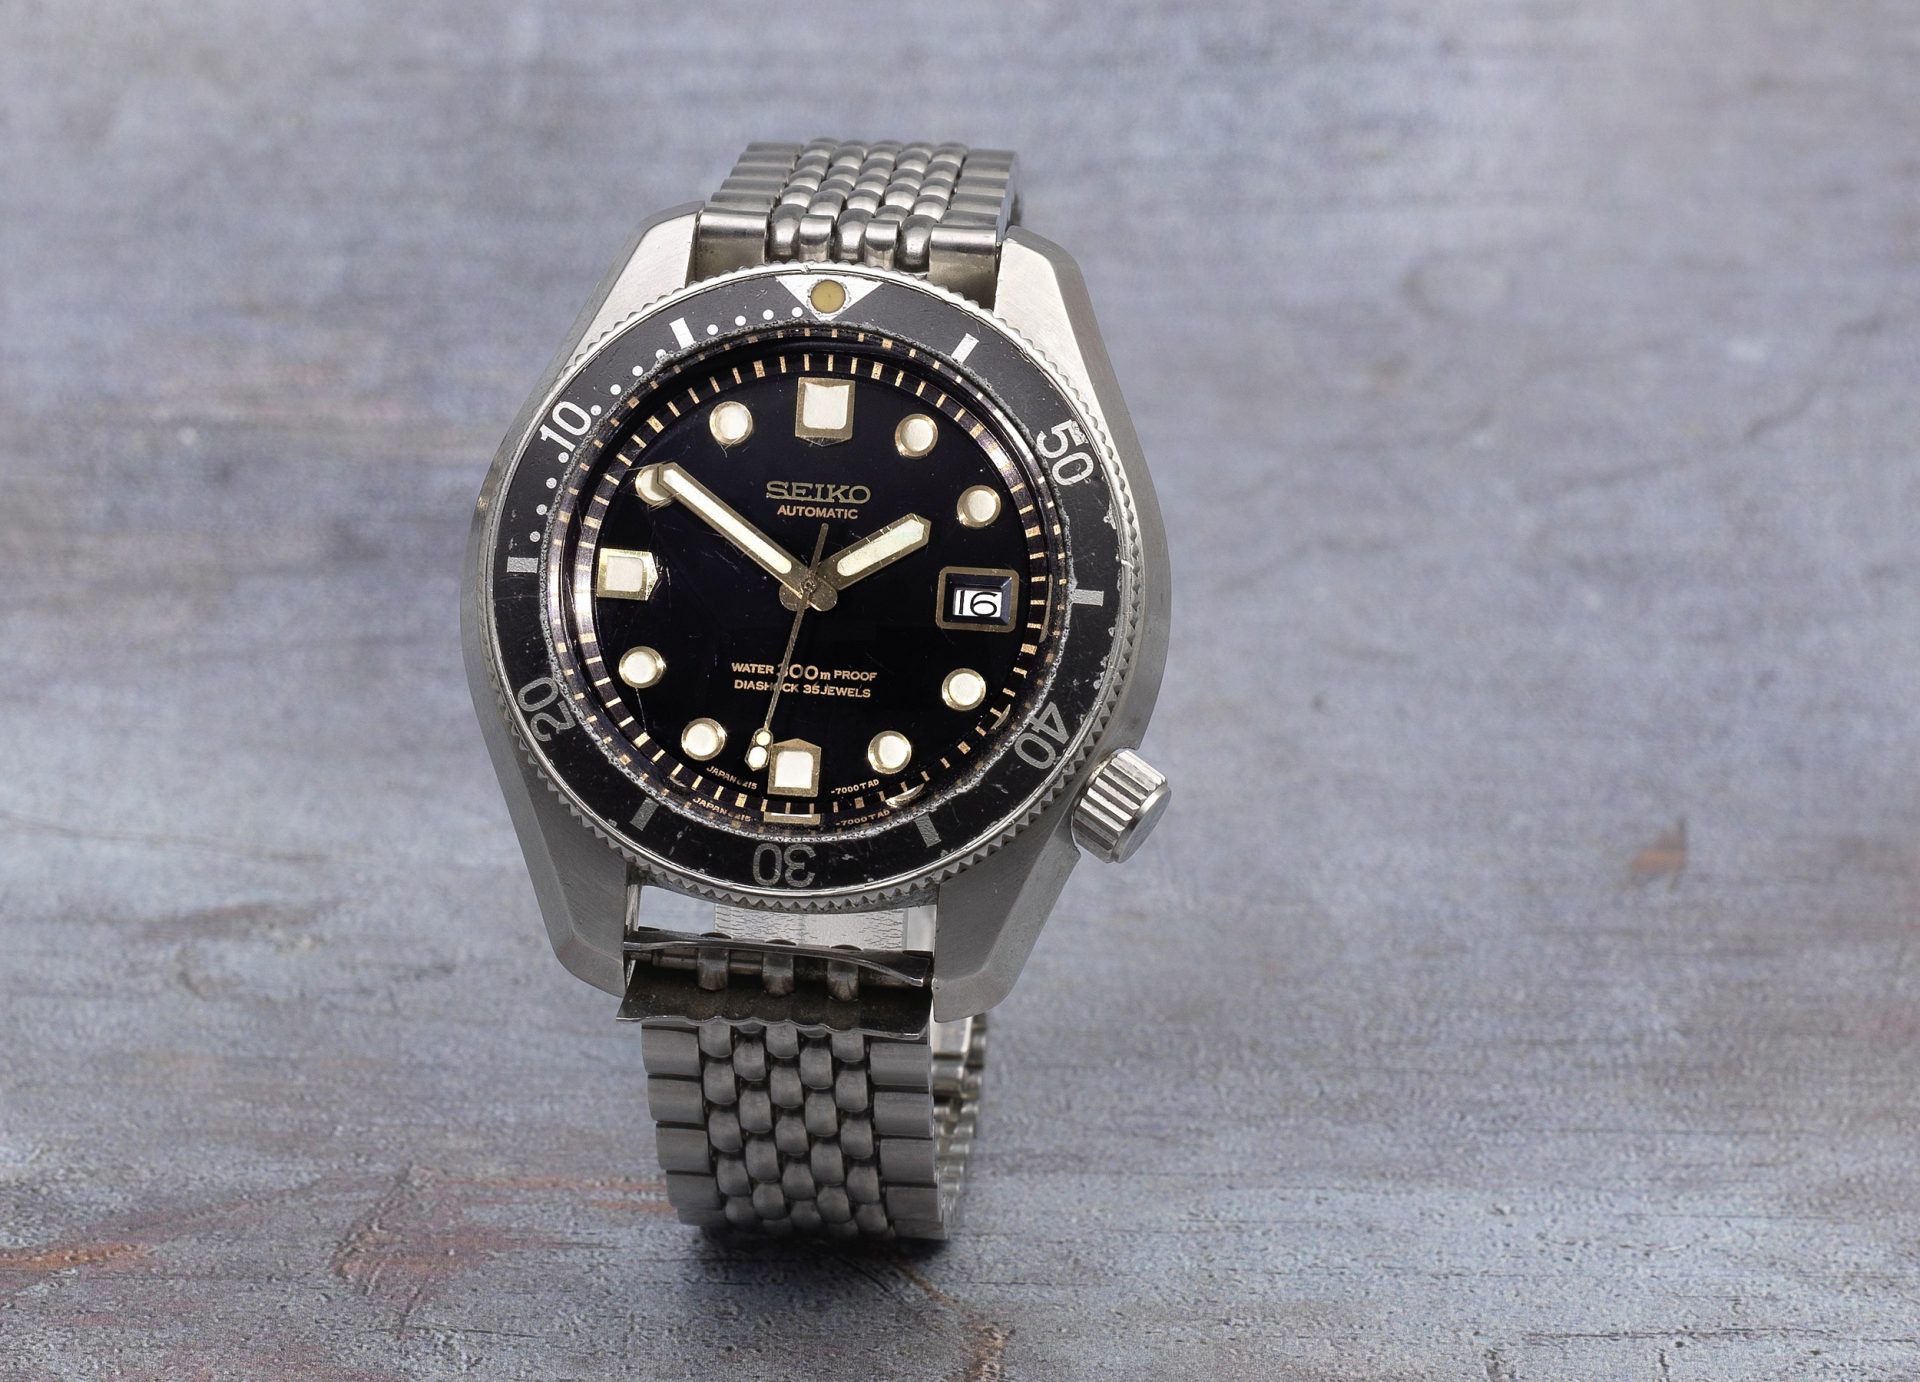 A rare seiko stainless steel automatic divers calendar bracelet watch sold by bonhams in june 2021 for 5500 the the joint highest sale price for a seiko listed on the saleroom